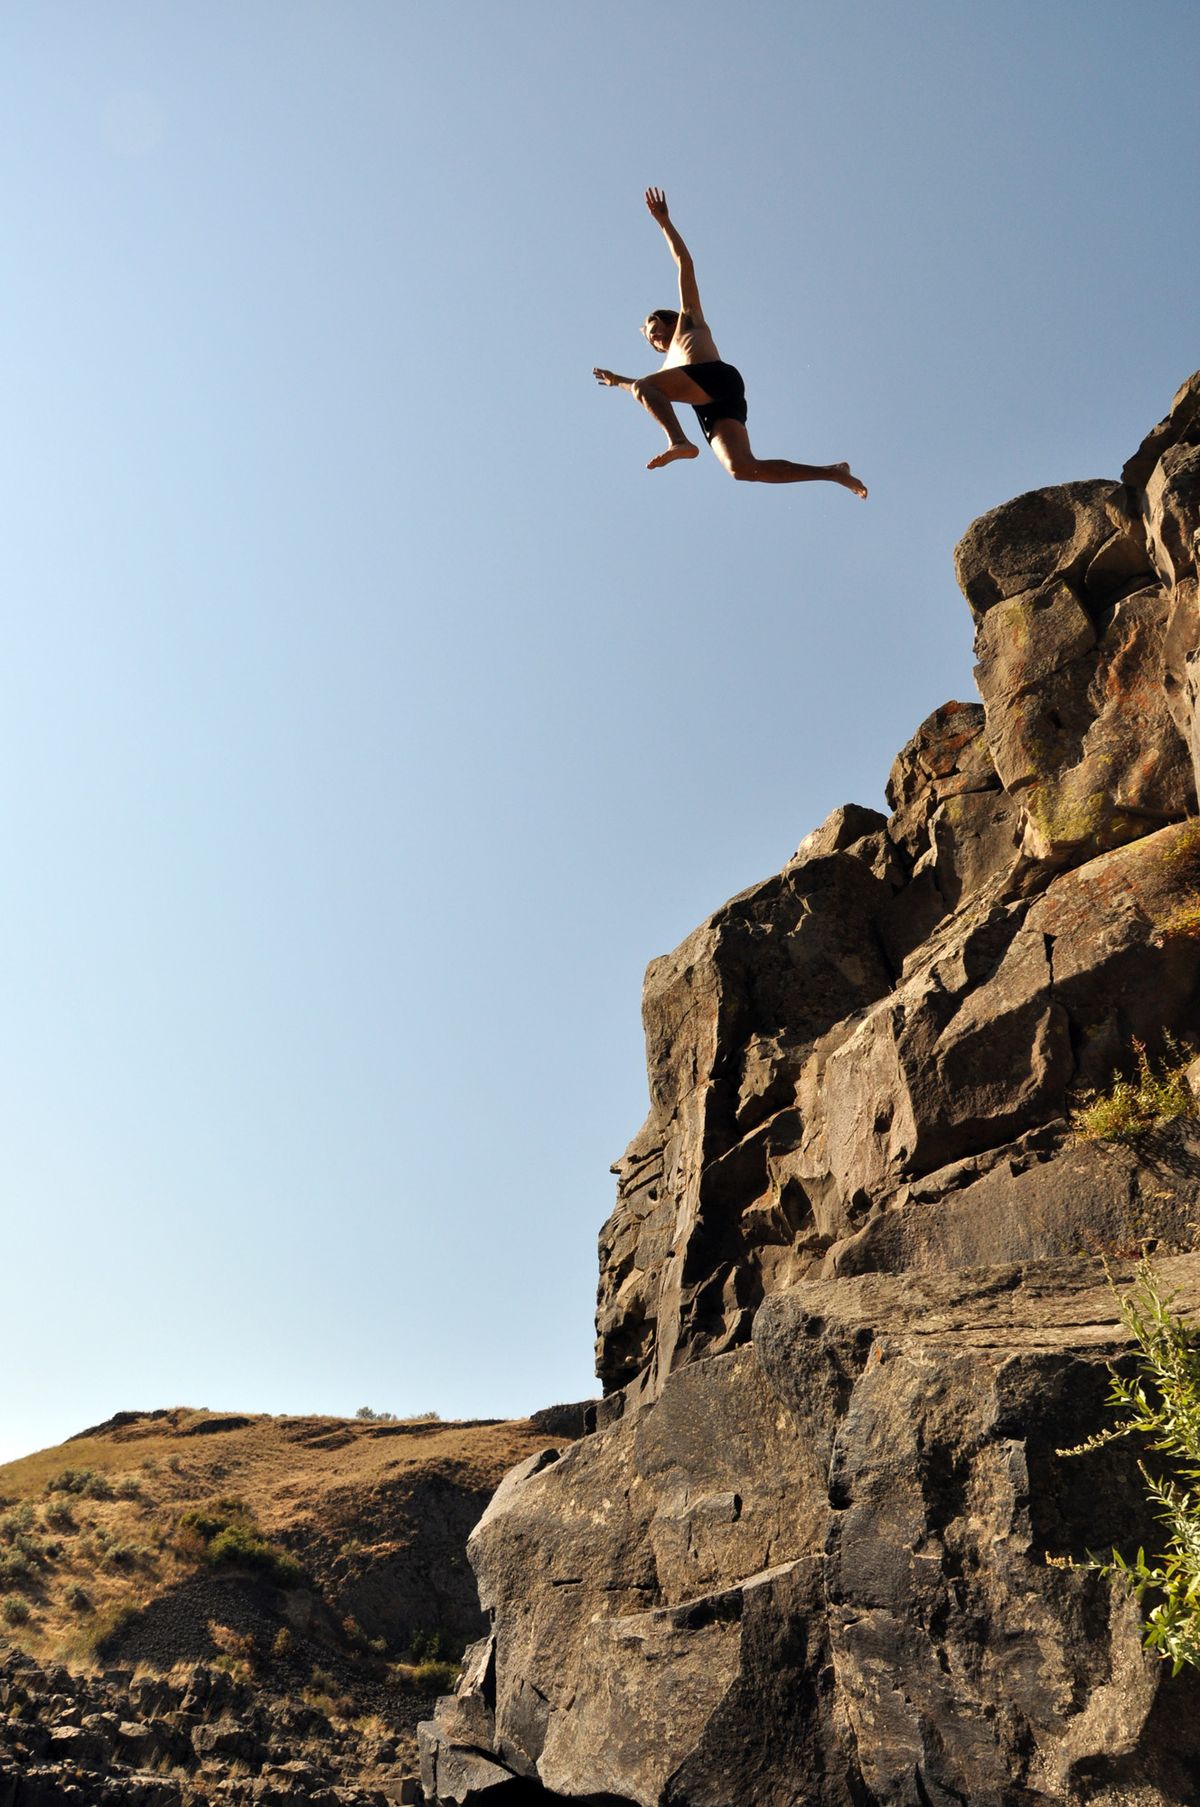 With the sun intensifying, Whitman College student Curtis Reid cools off with a leap to the river pool upstream from Palouse Falls. (Rich Landers / The Spokesman-Review)